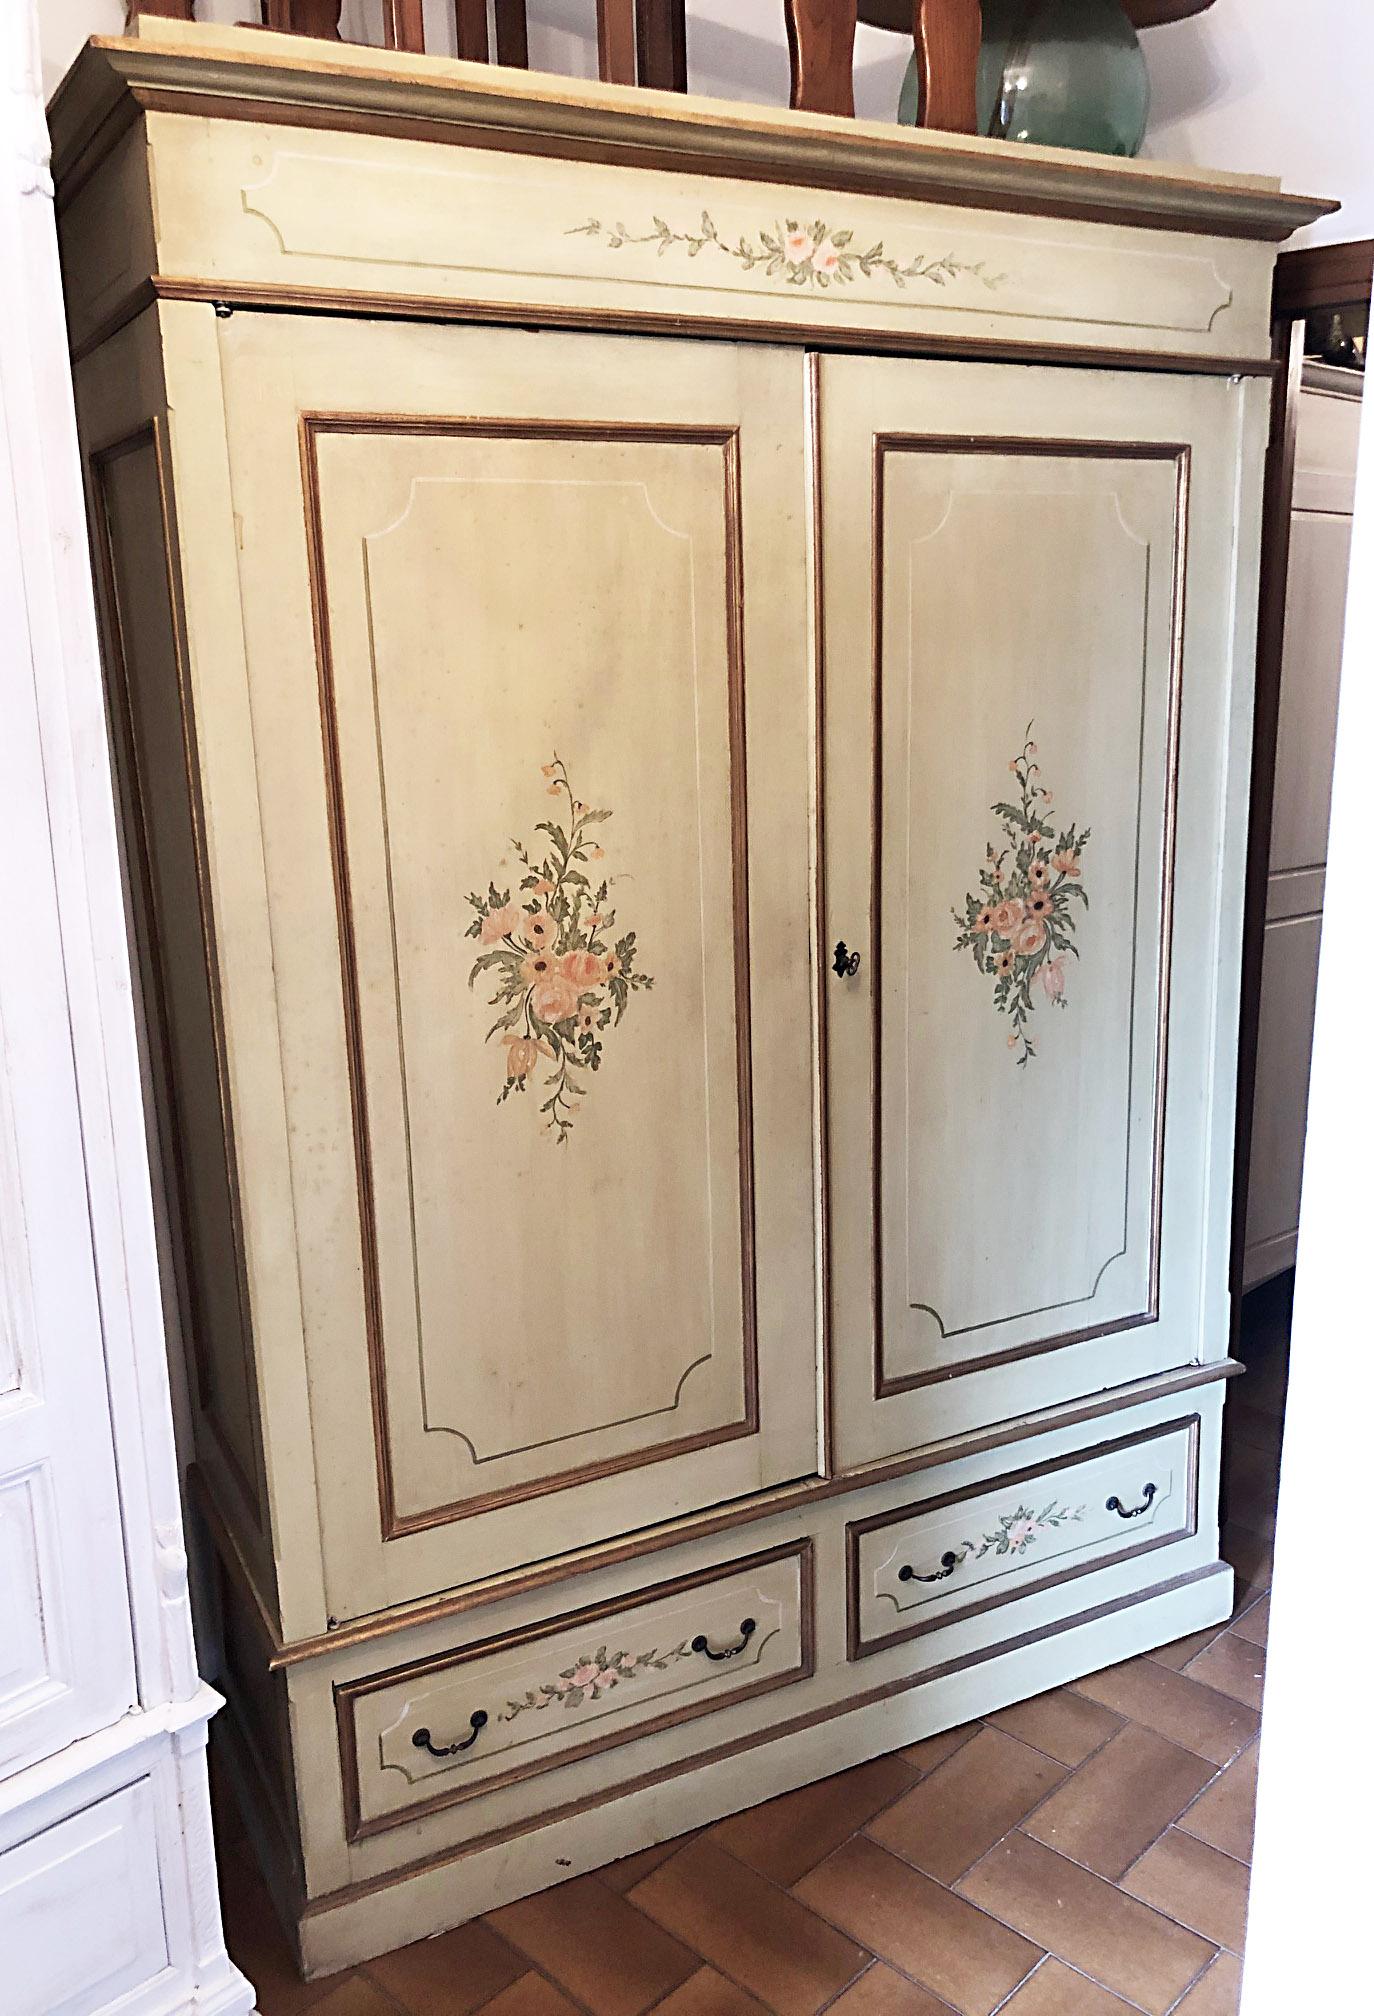 Early 20th Century Decorated Wardrobe Fir Handmade Country Chic Original Tuscan 1